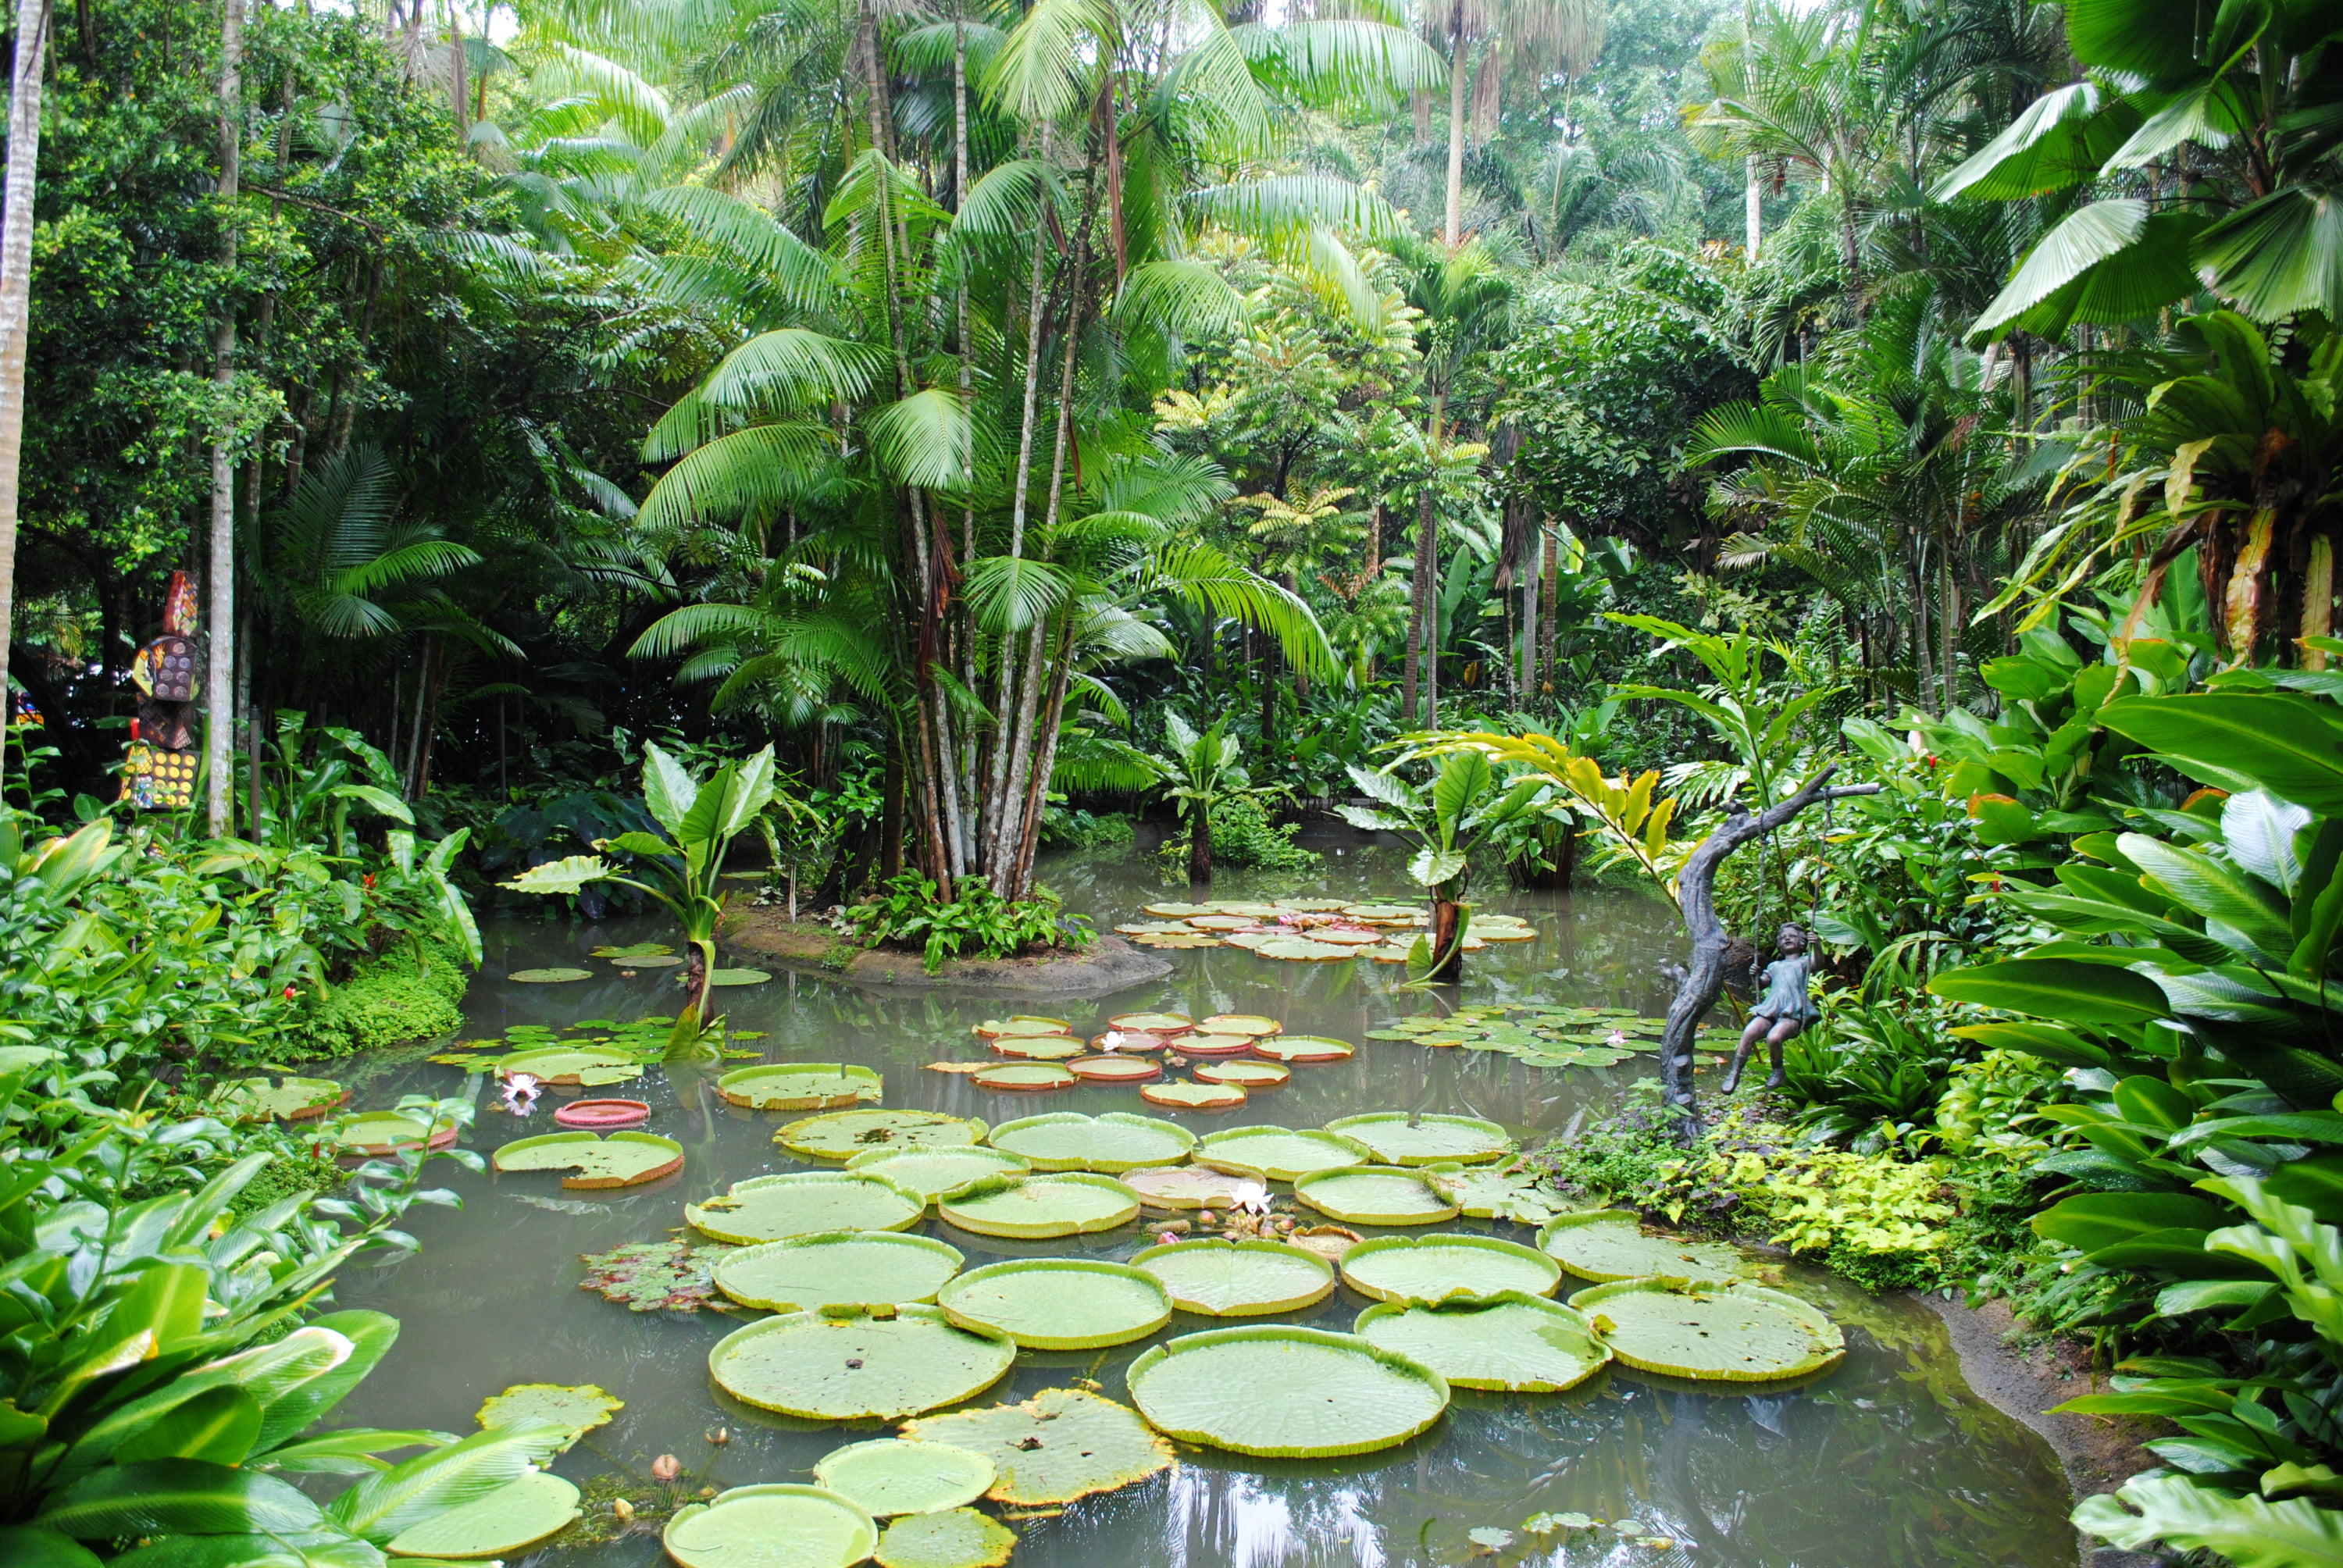 green lily pad, trees, pond, garden, Singapore, the bushes, water lilies